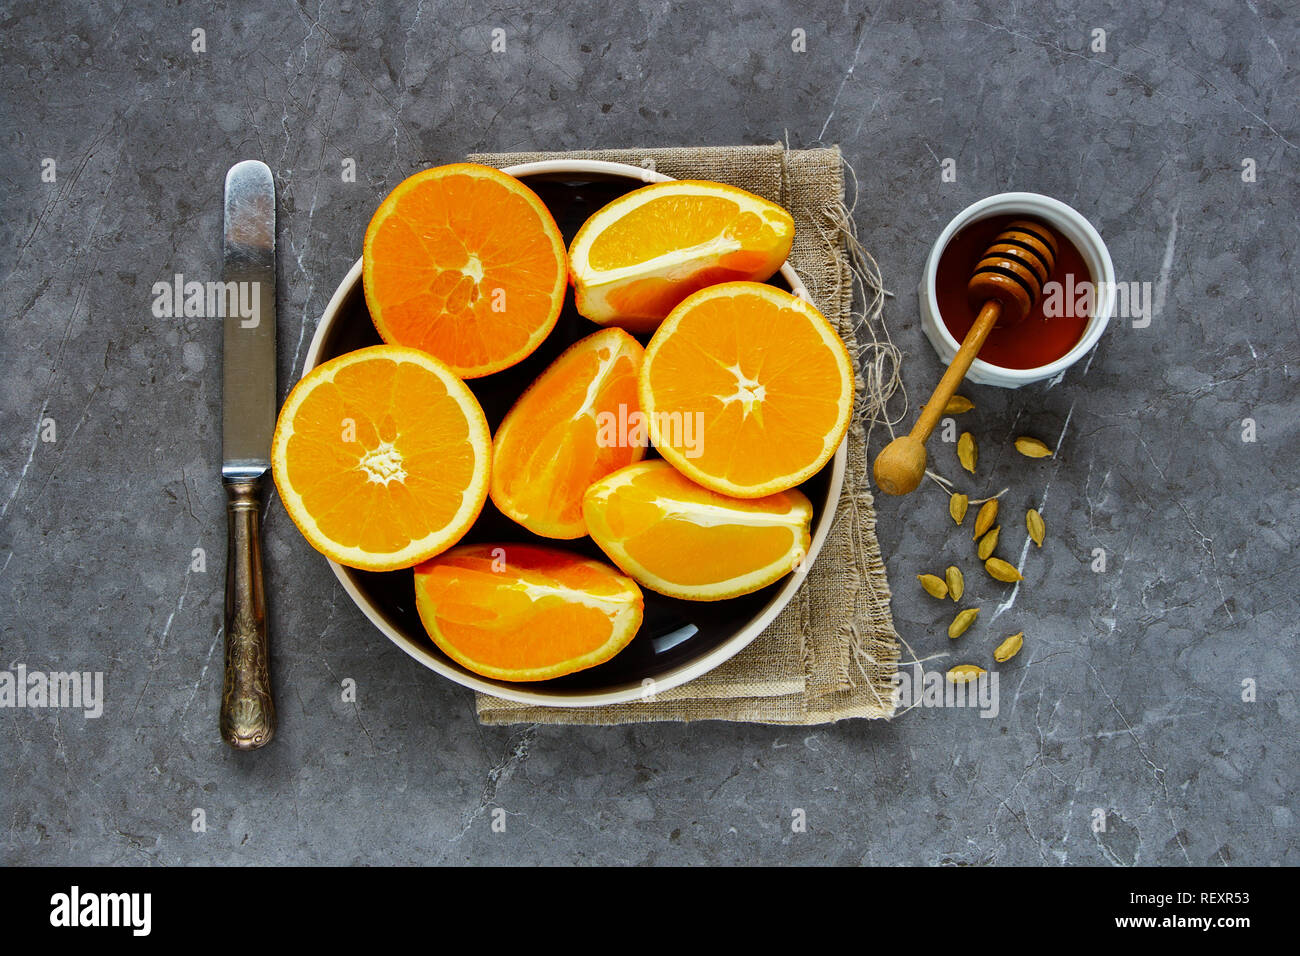 Making natural hot drink. Ripe oranges, honey and spices flat-lay. Healthy beverages Stock Photo